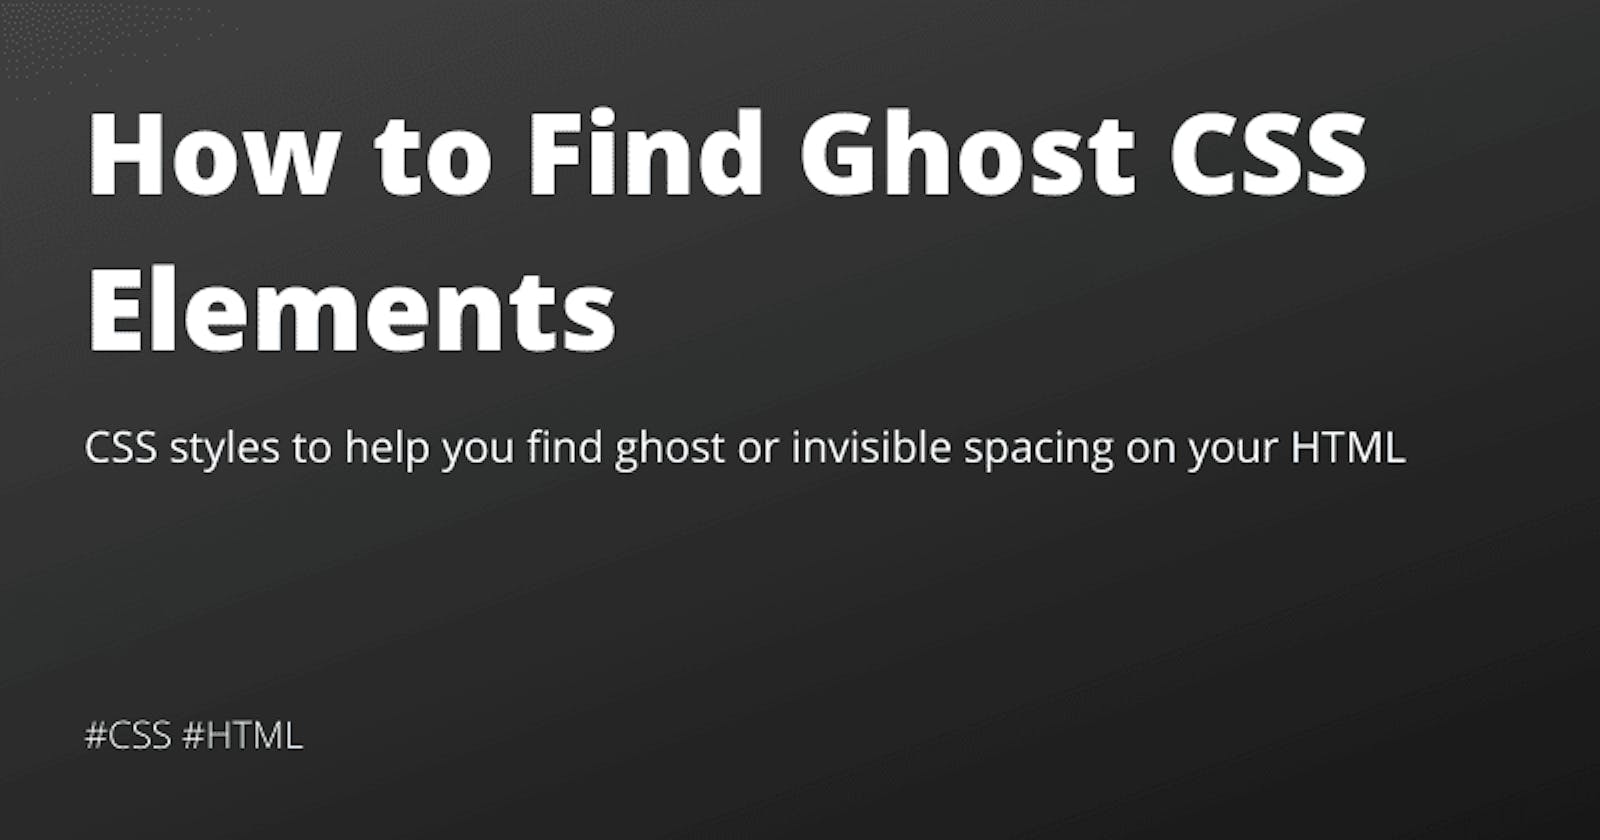 How to Find Ghost CSS Elements